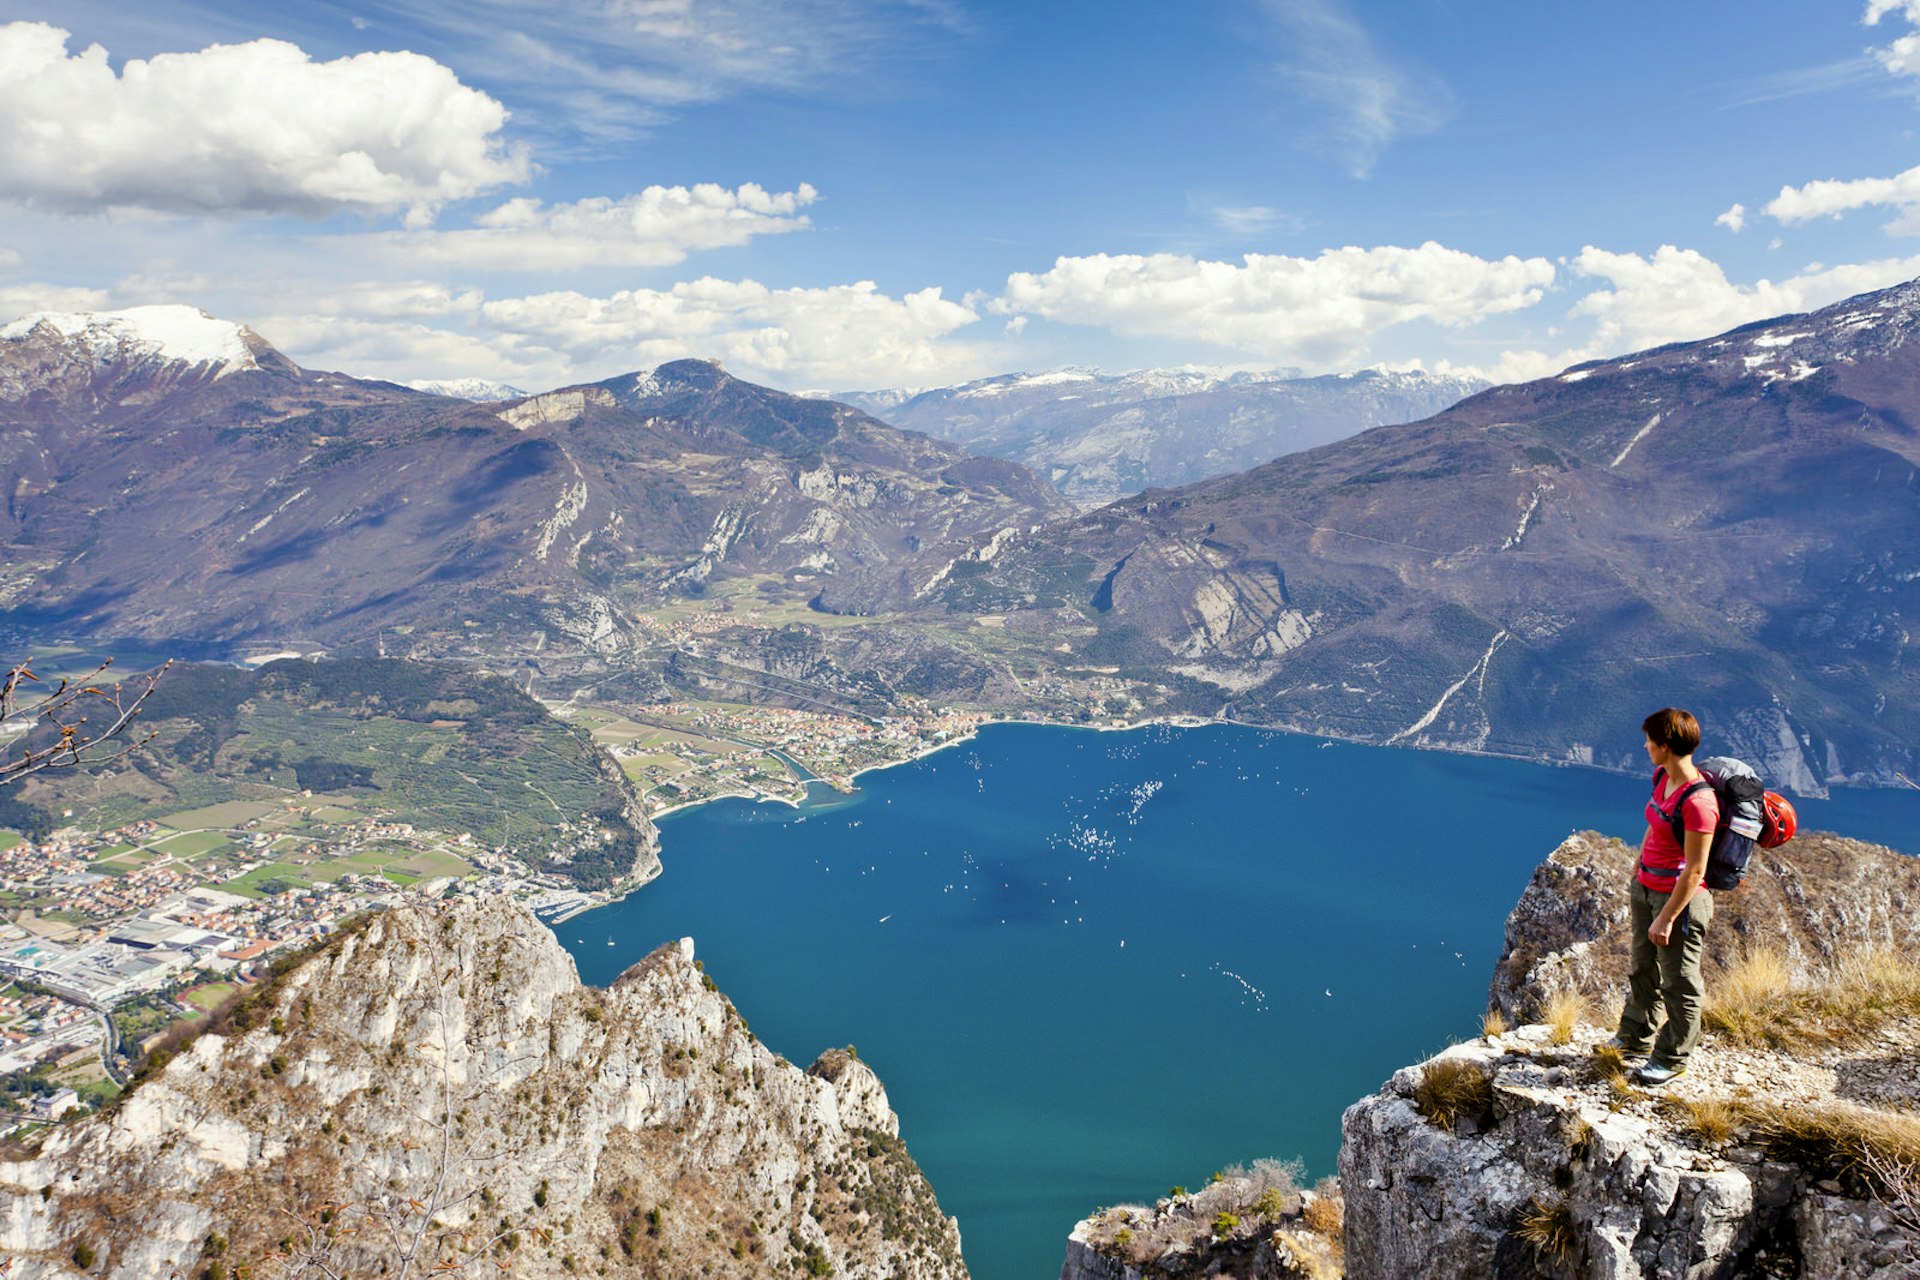 A female hiker stands atop a rock overlooking Lake Garda and distant mountains